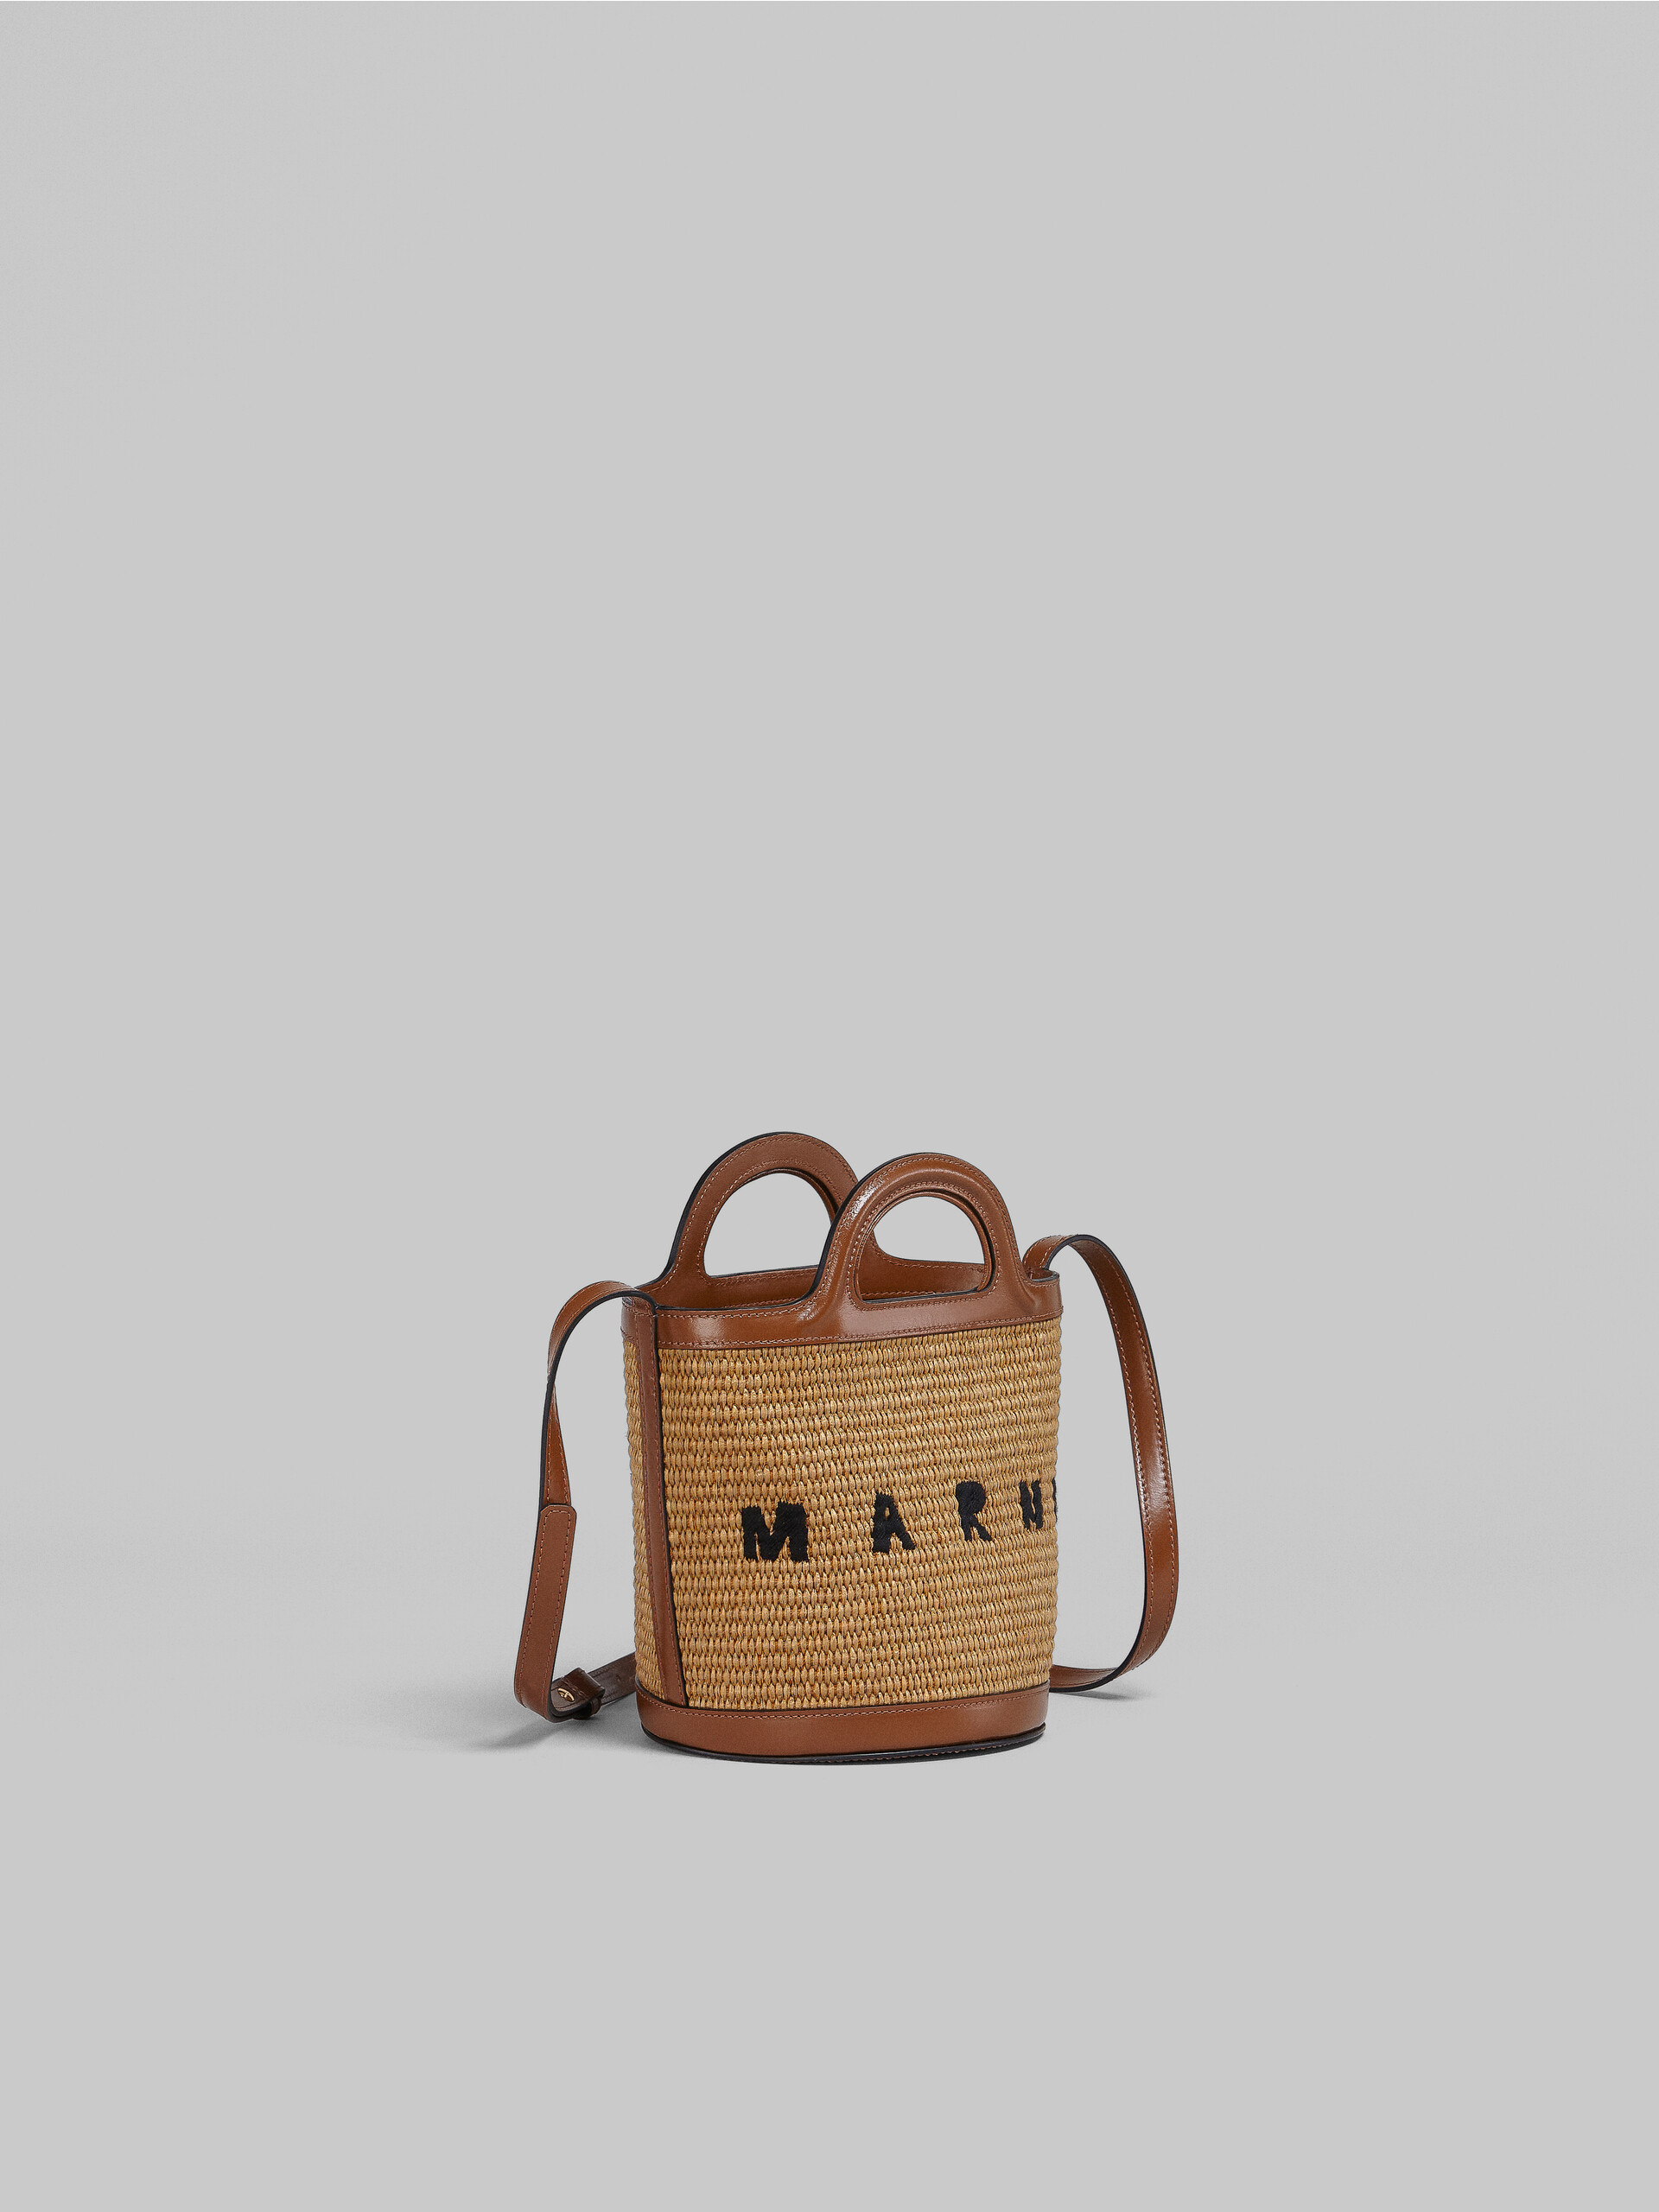 Tropicalia Small Bucket Bag in brown leather and raffia-effect fabric